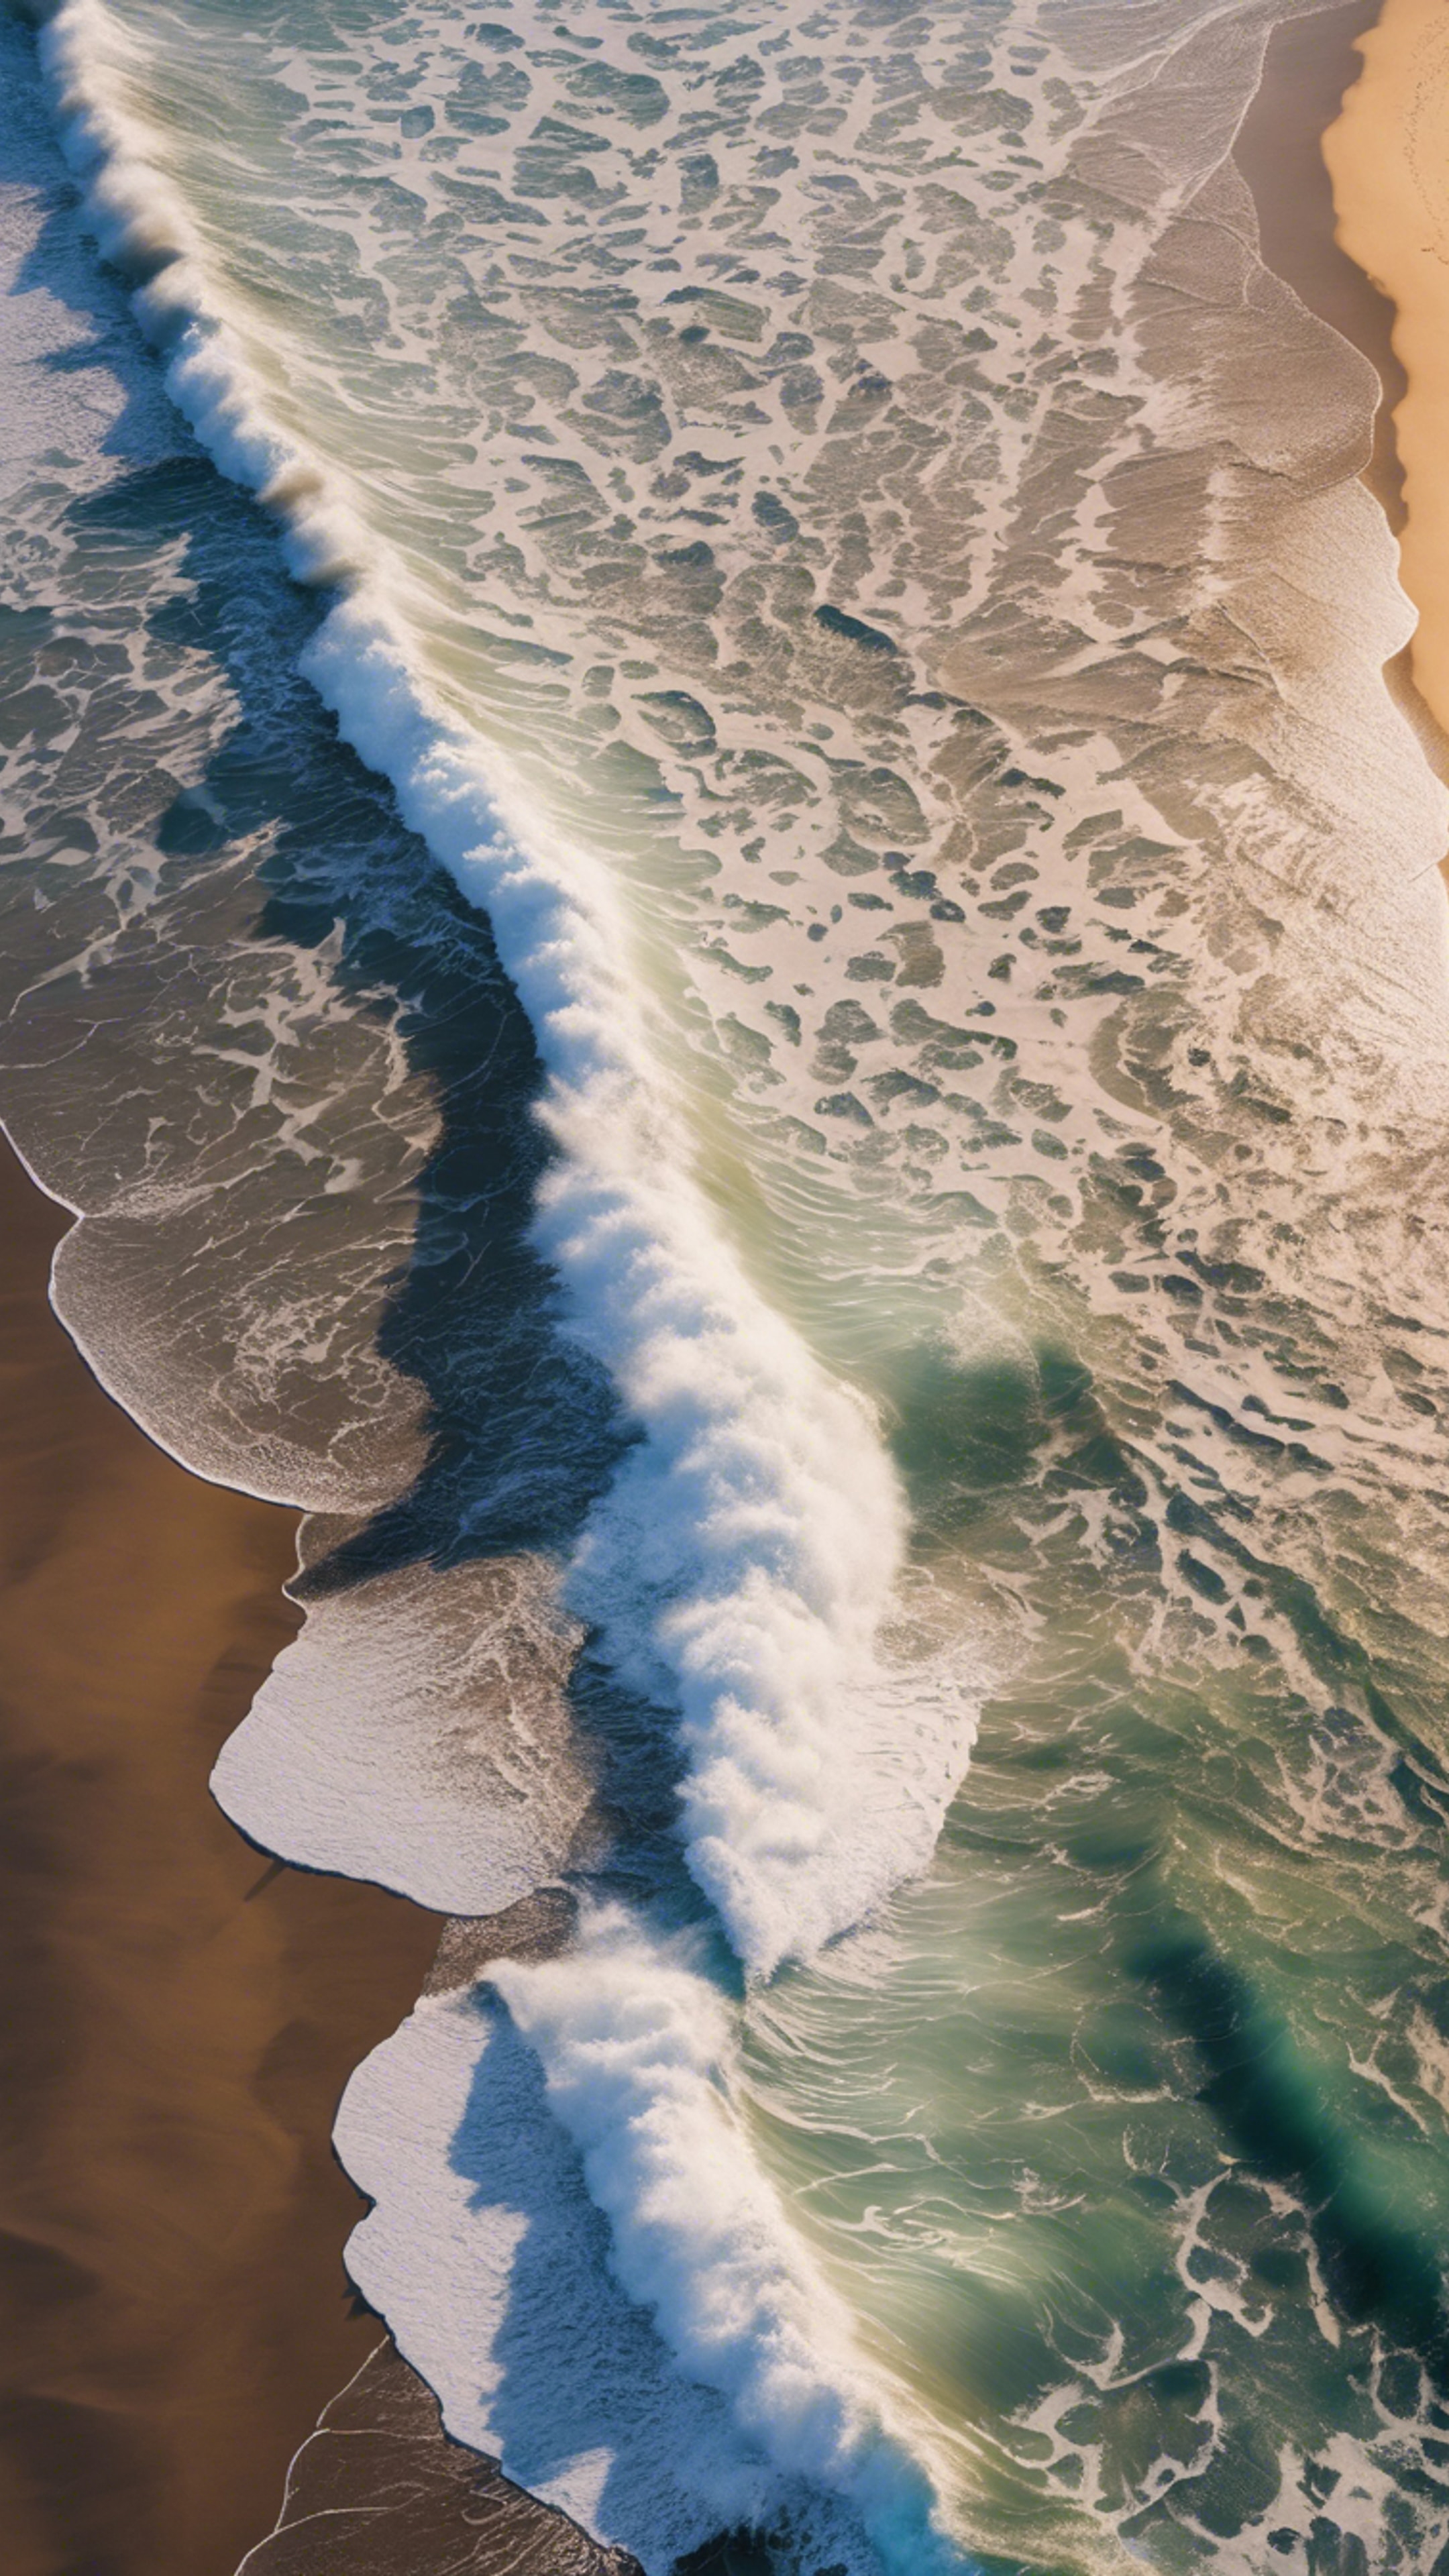 An aerial beach view, capturing the intricate pattern of crashing waves on the shoreline.壁紙[e7cf89932ee44f8c9088]